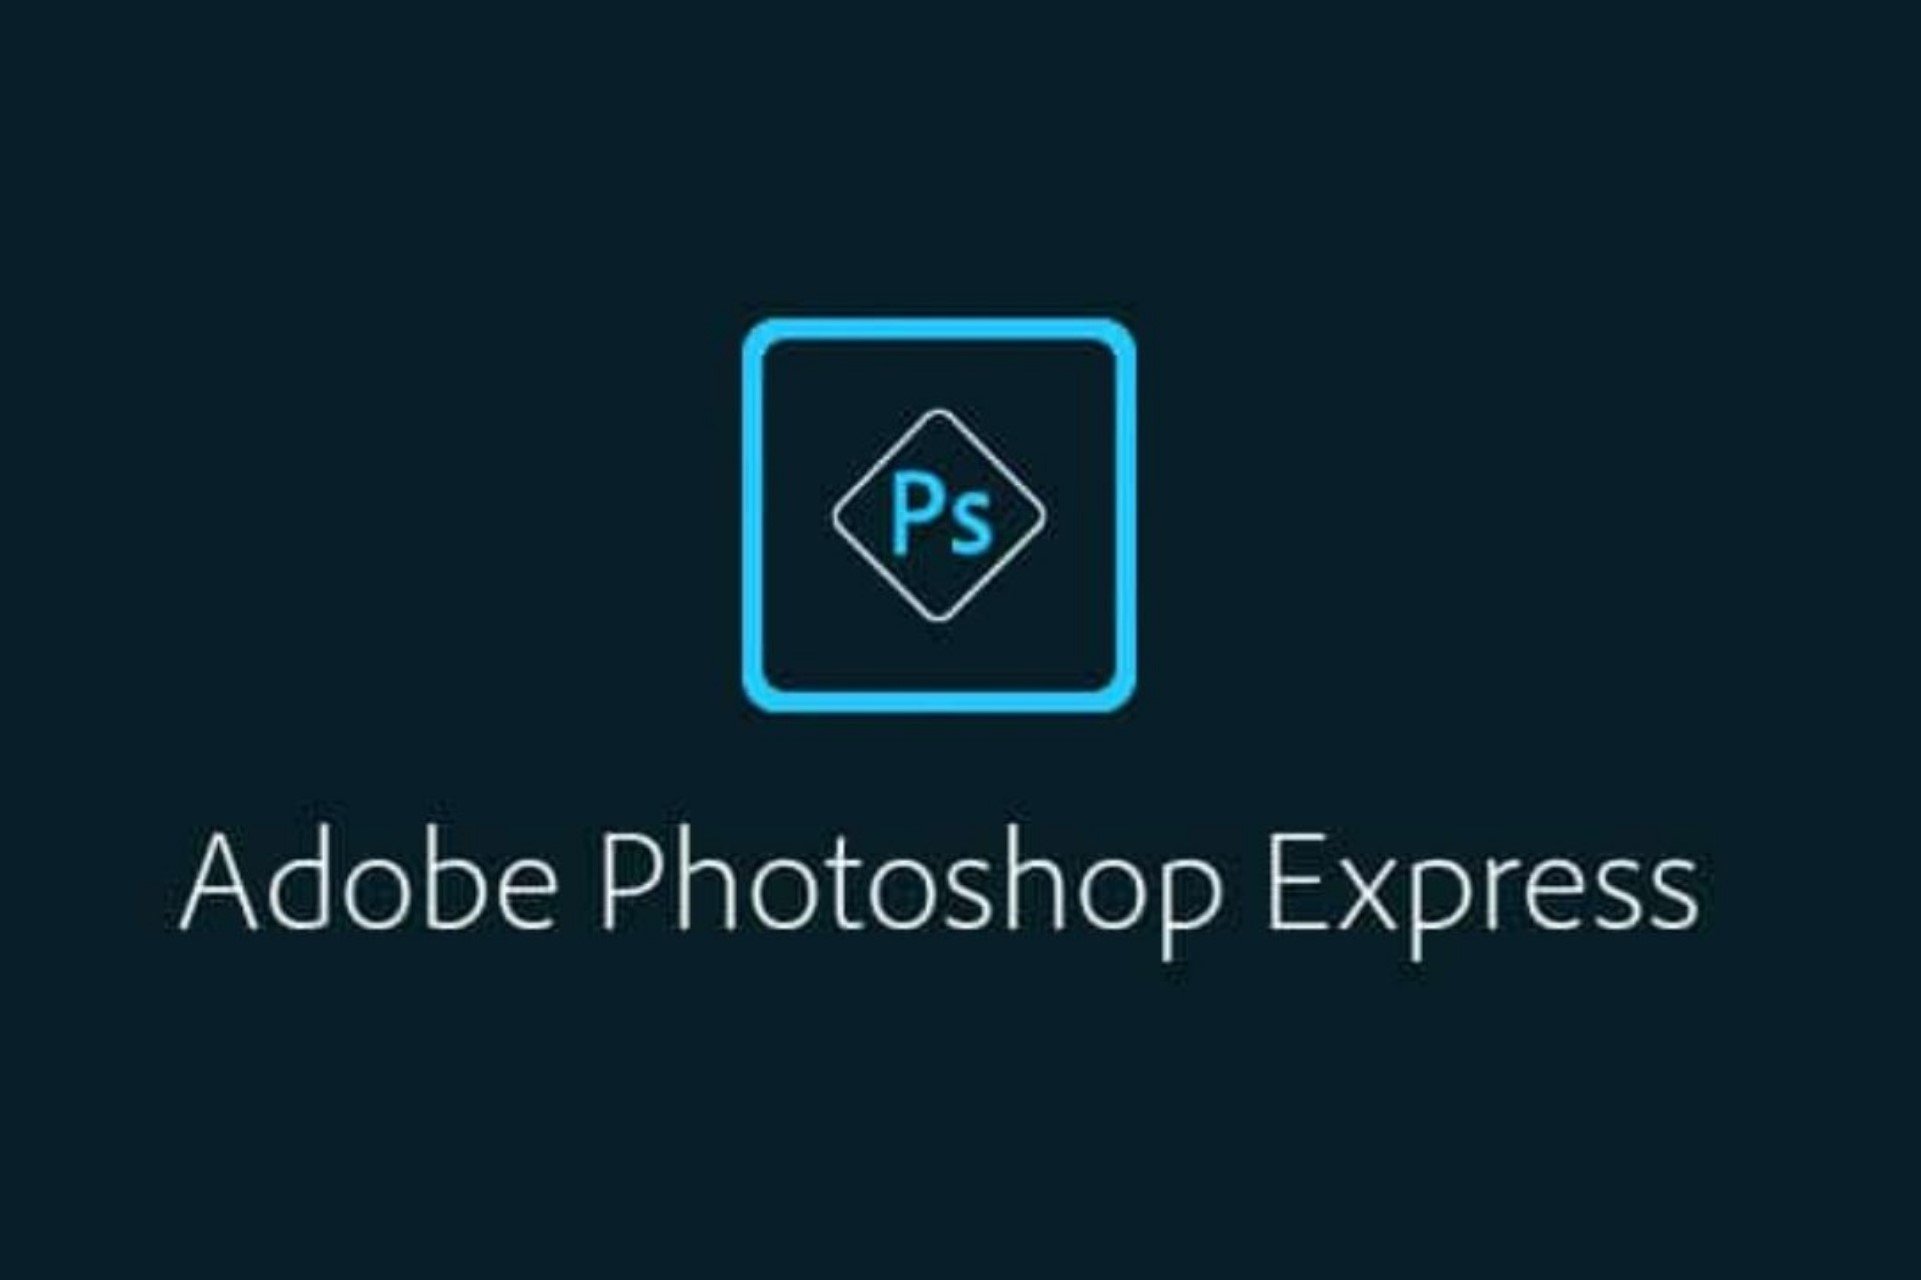 adobe photoshop express software free download for windows 7